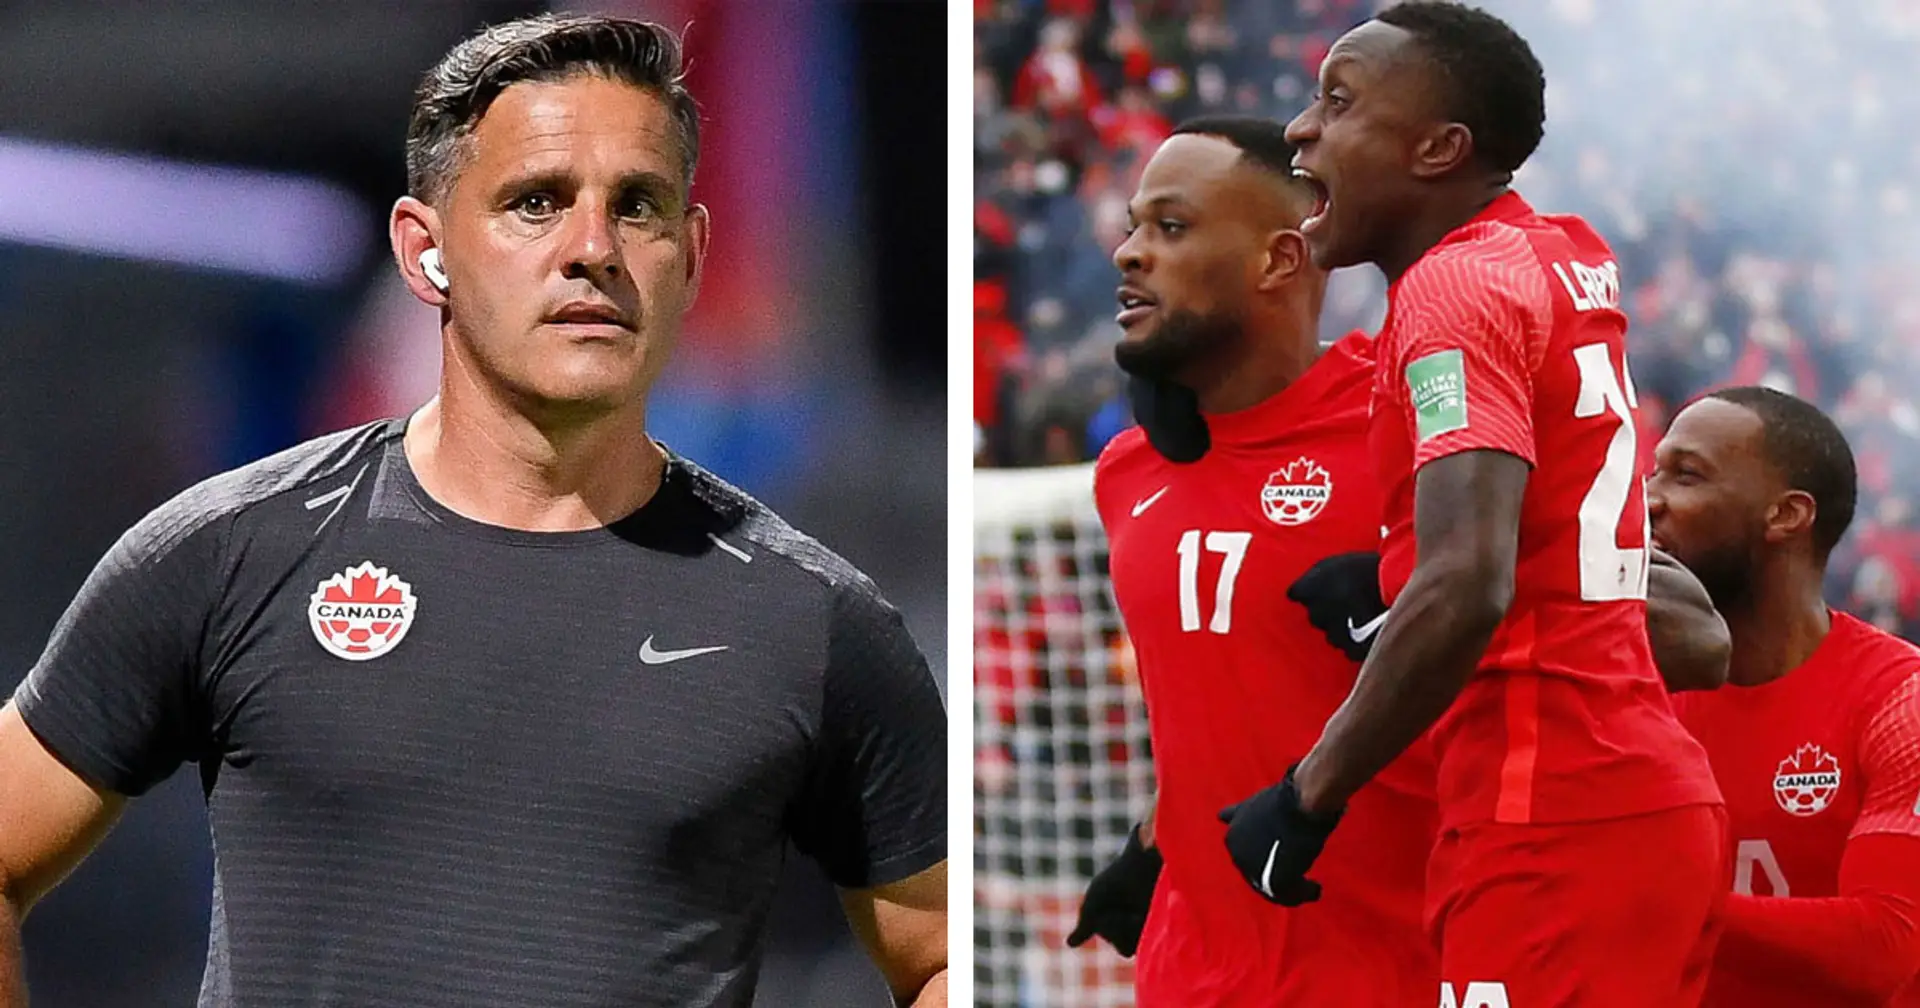 John Herdman makes history for helping Canada secure World Cup qualification after 36-year absence